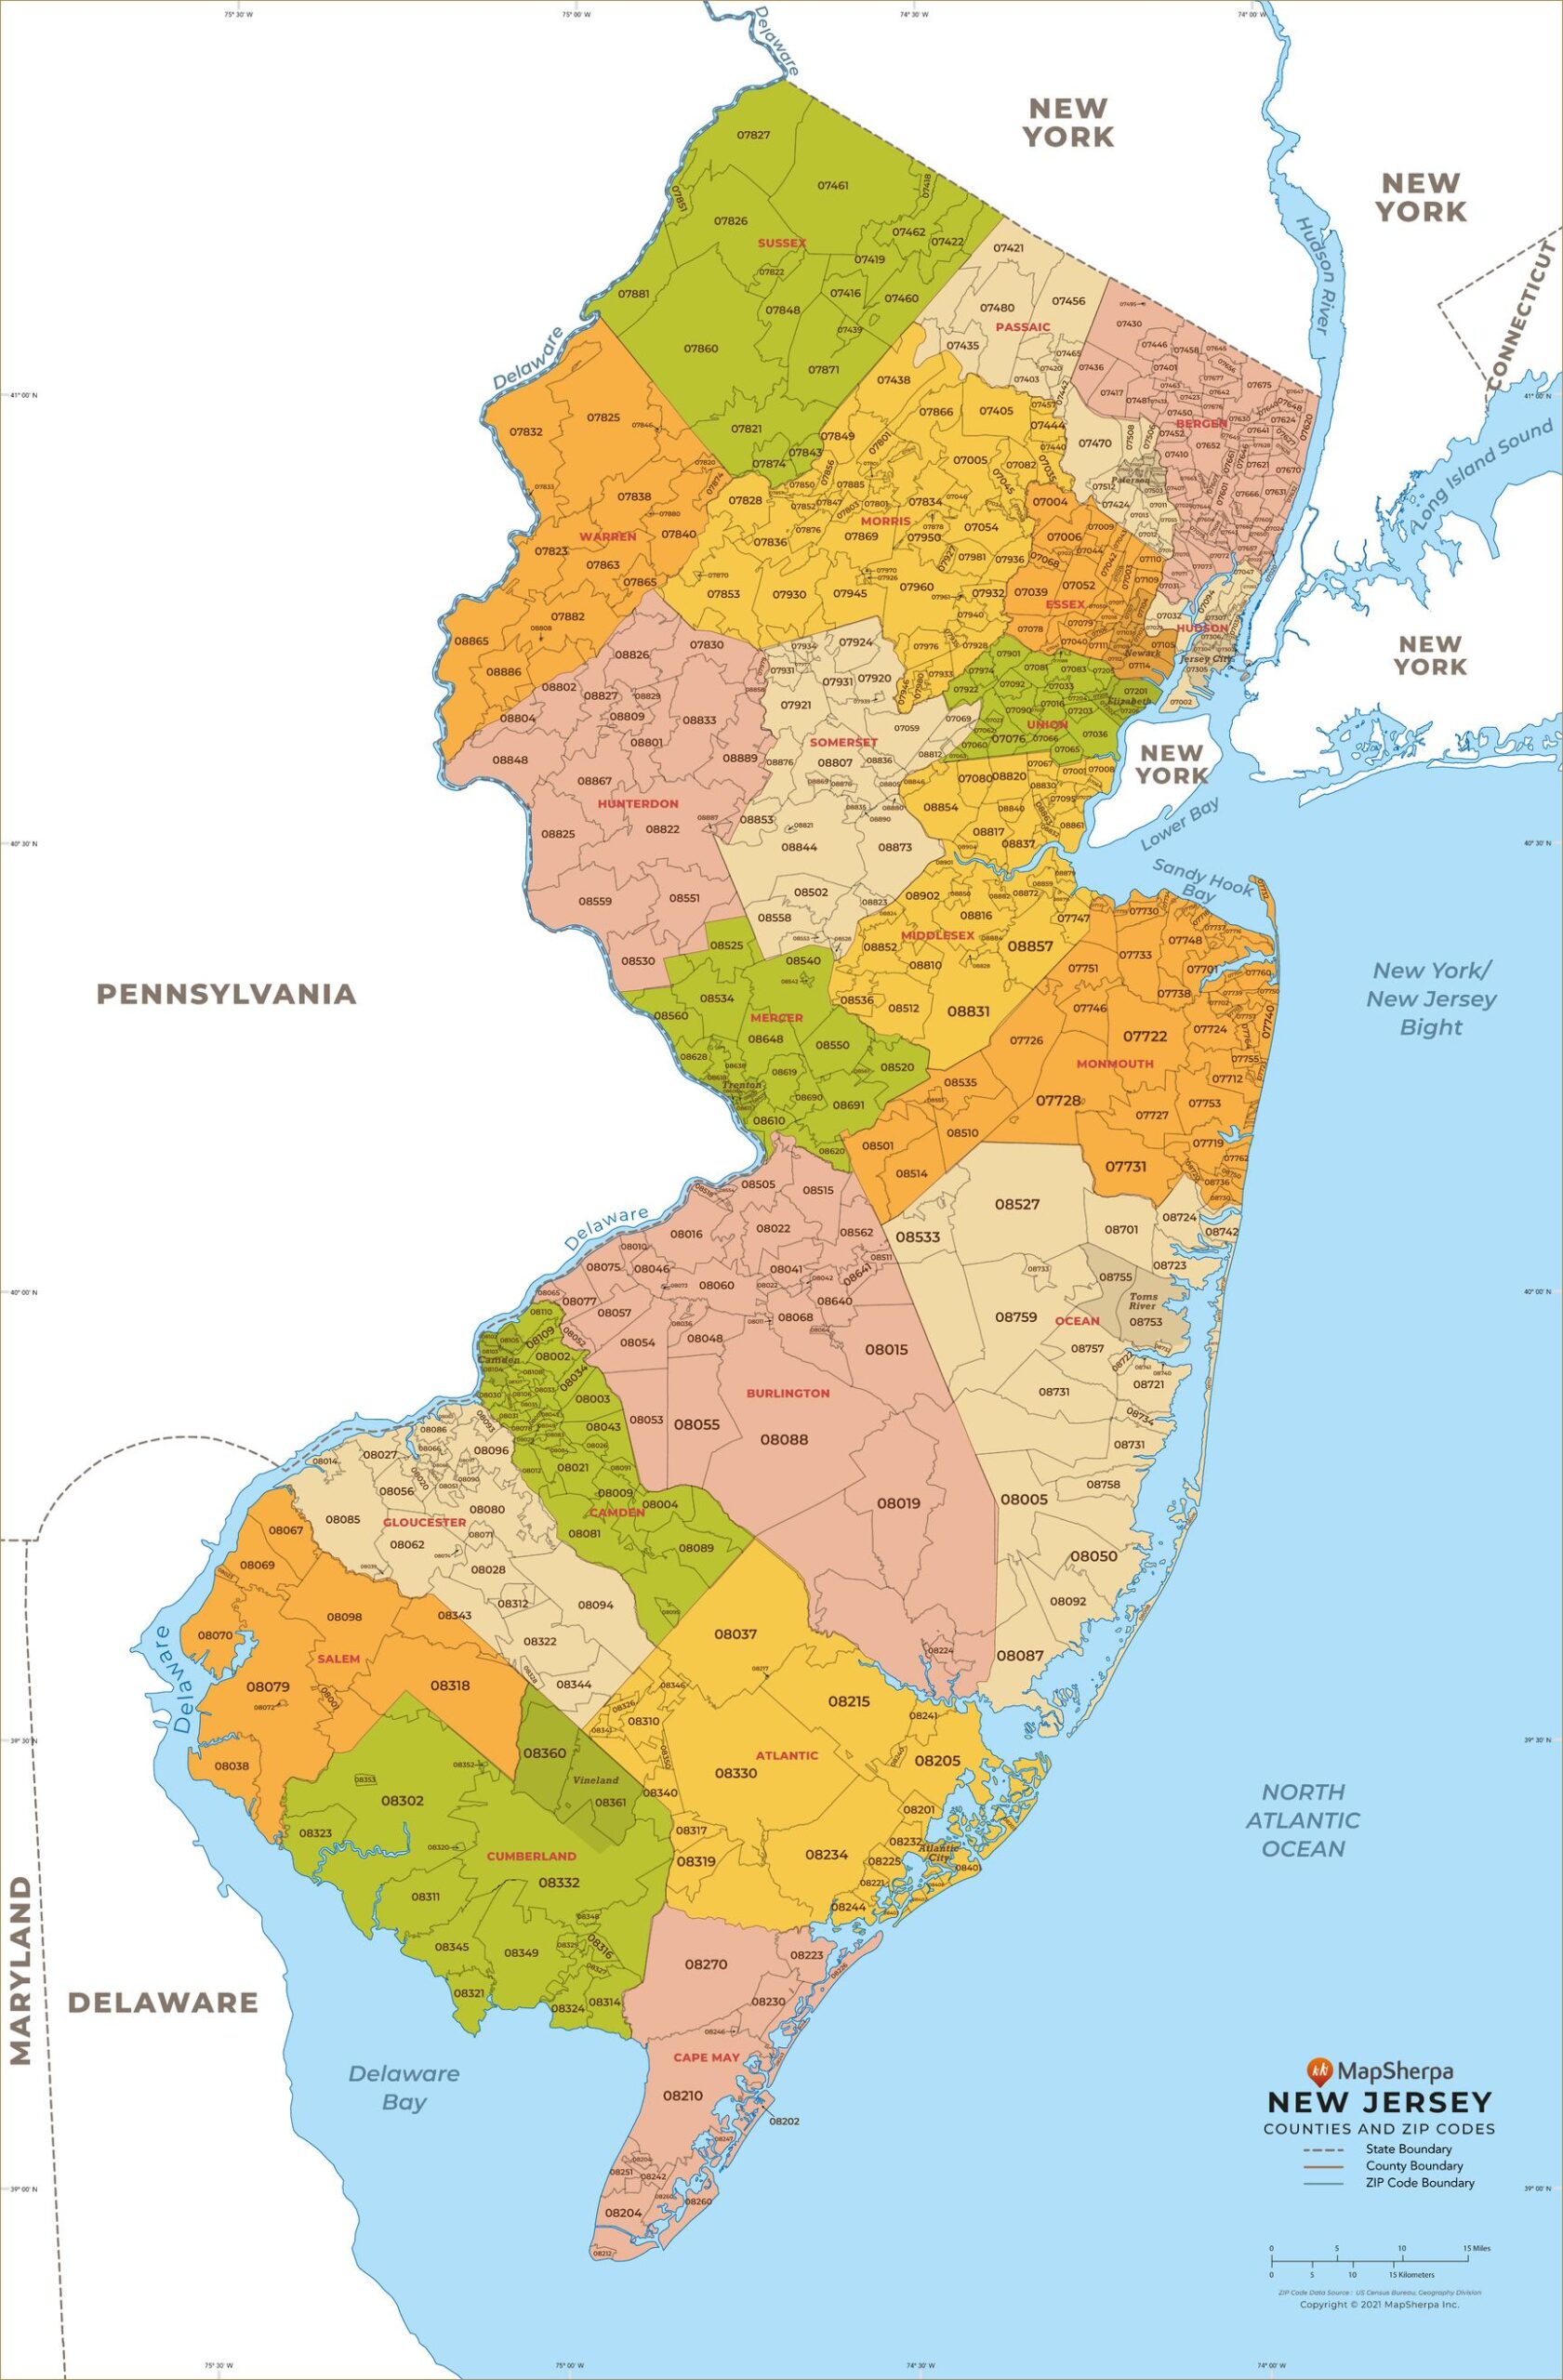 New Jersey ZIP Code Map with Counties by MapSherpa - The Map Shop